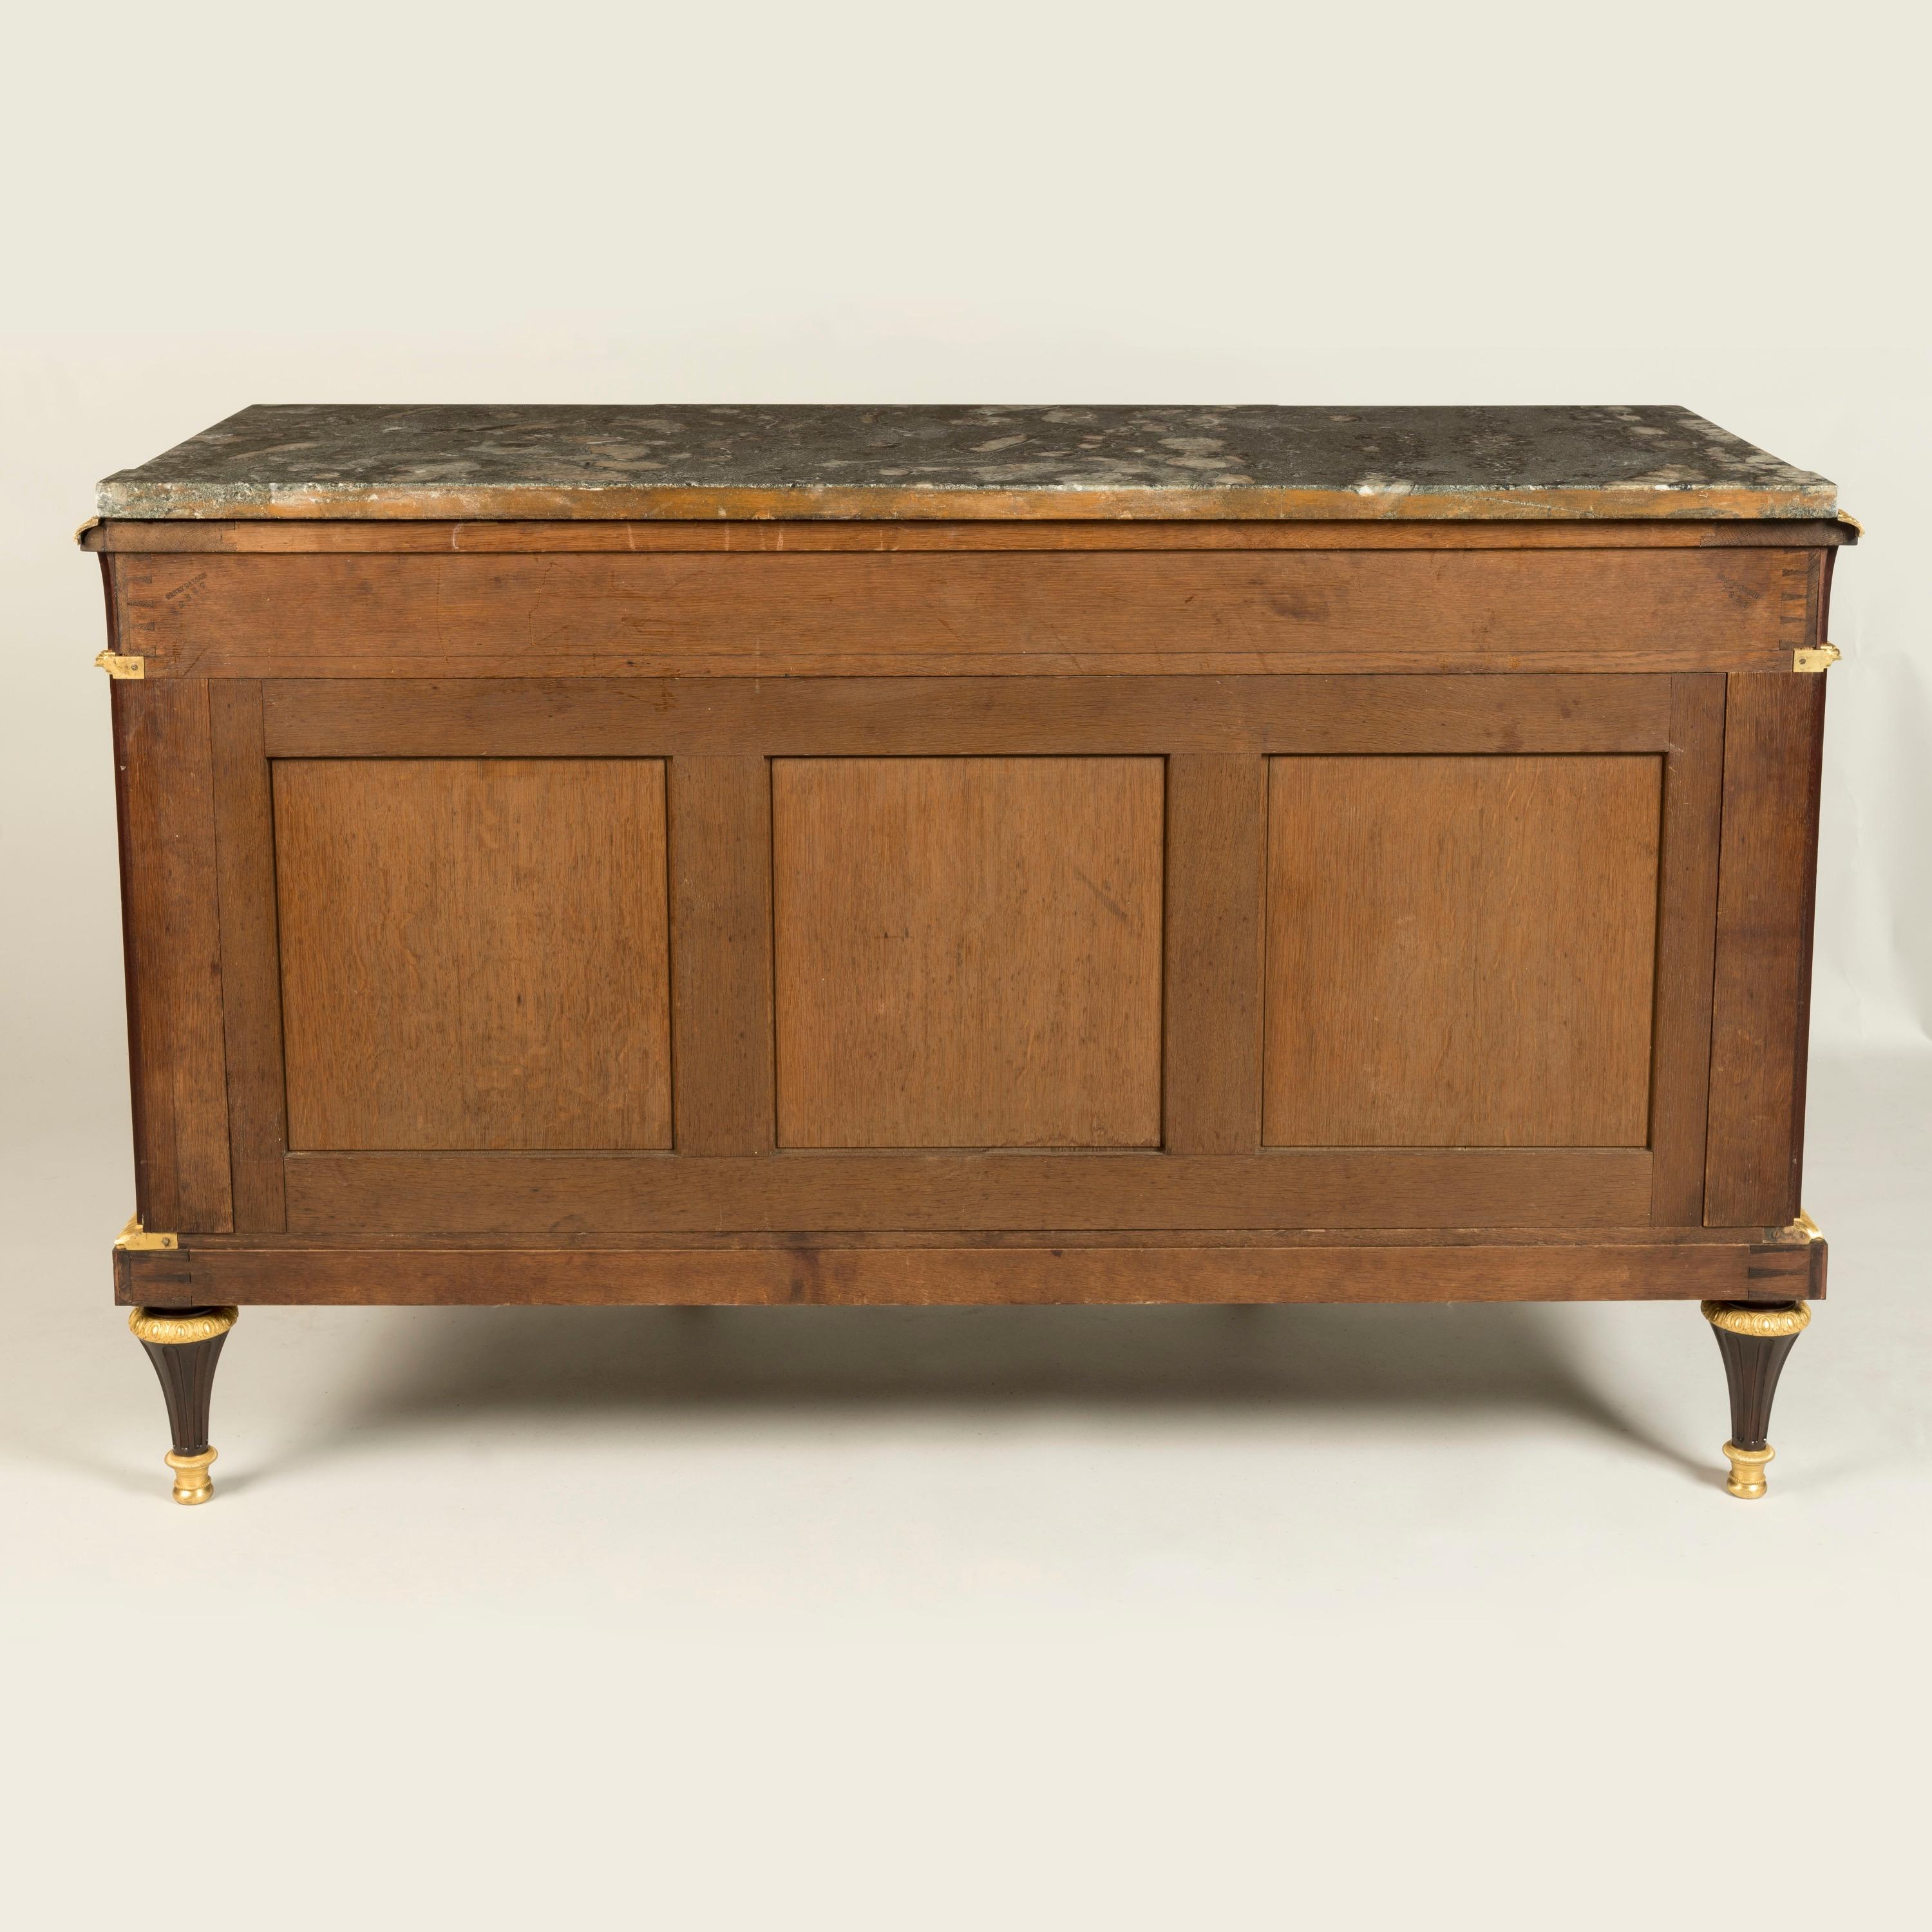 19th Century French Marble Top Commode in the Louis XVI Style by Henry Dasson For Sale 7